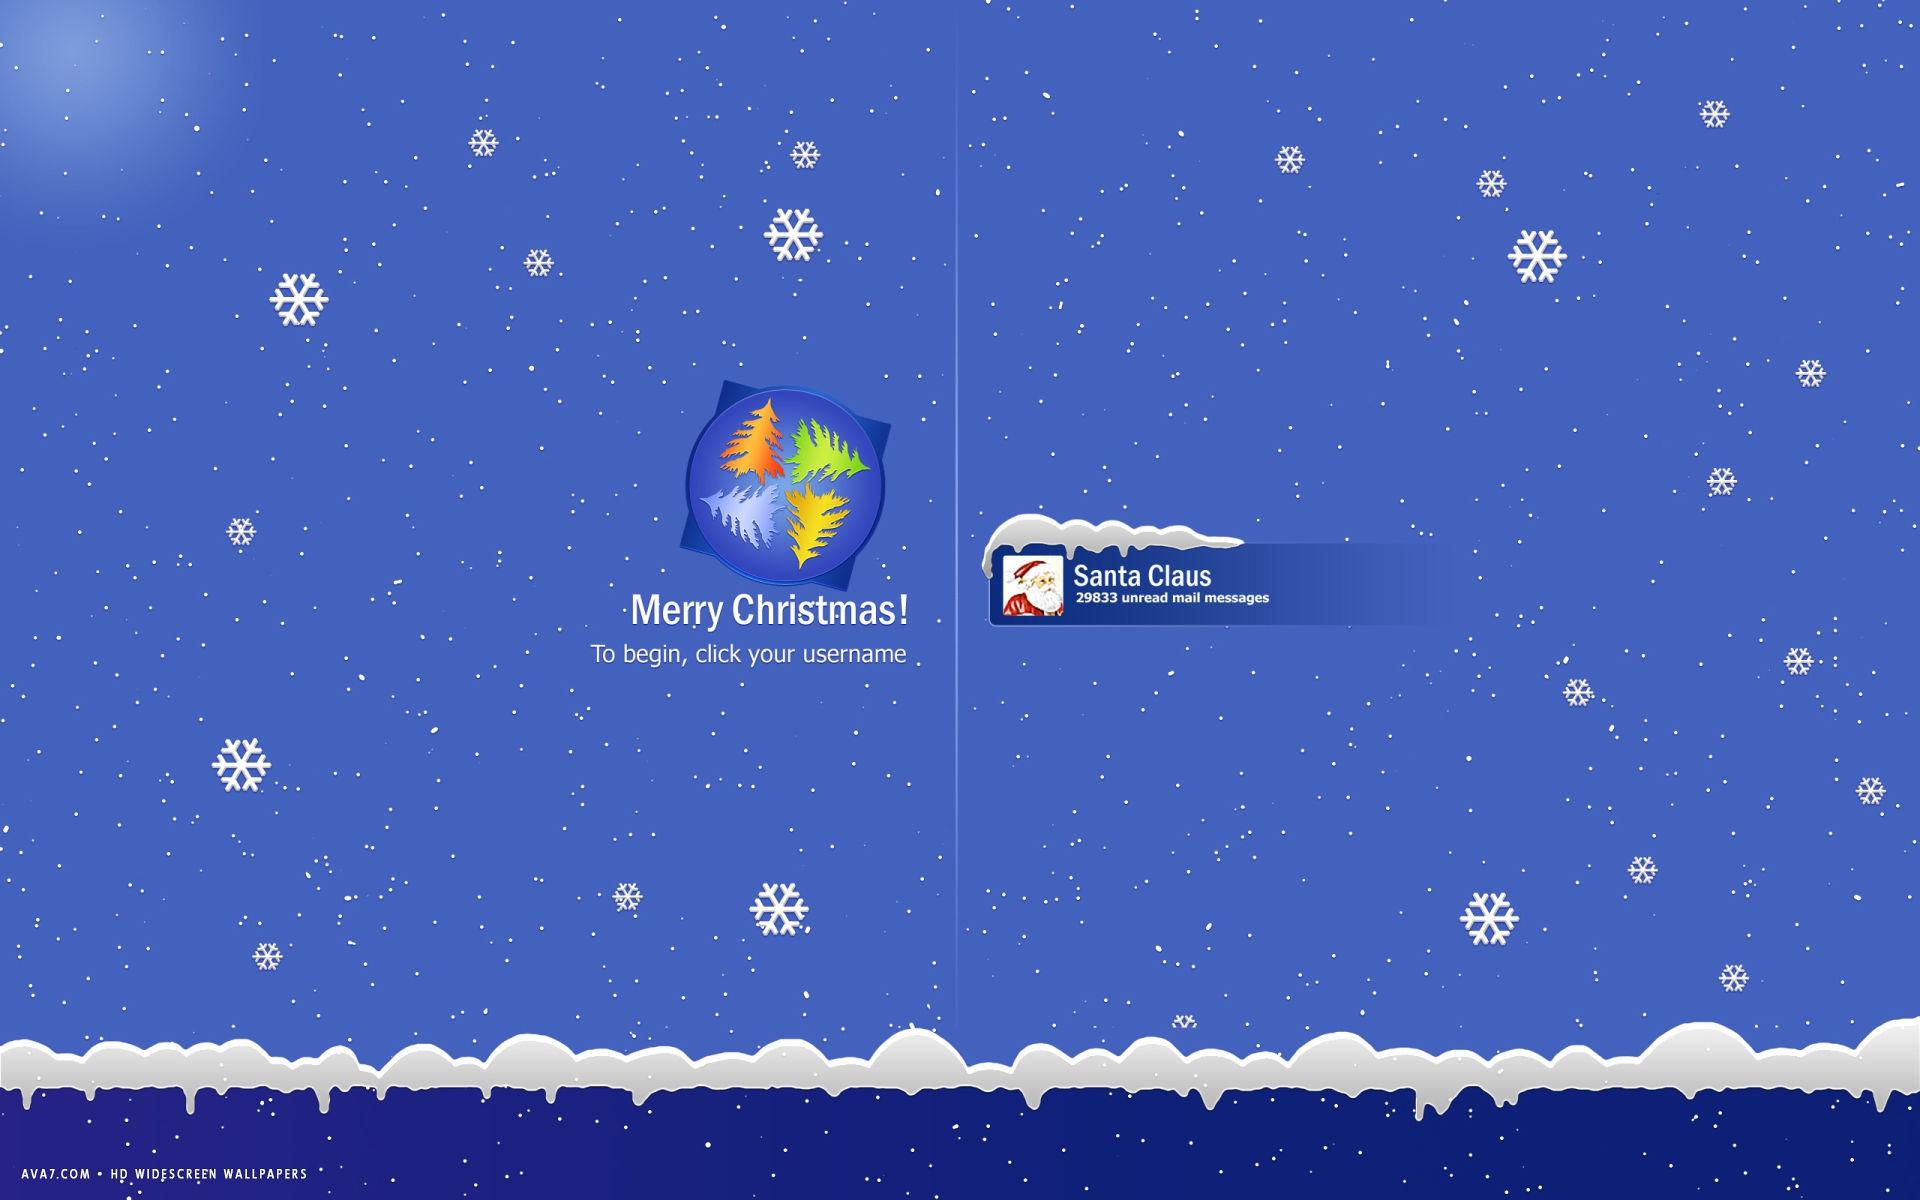 merry christmas windows login santa claus mail messages funny